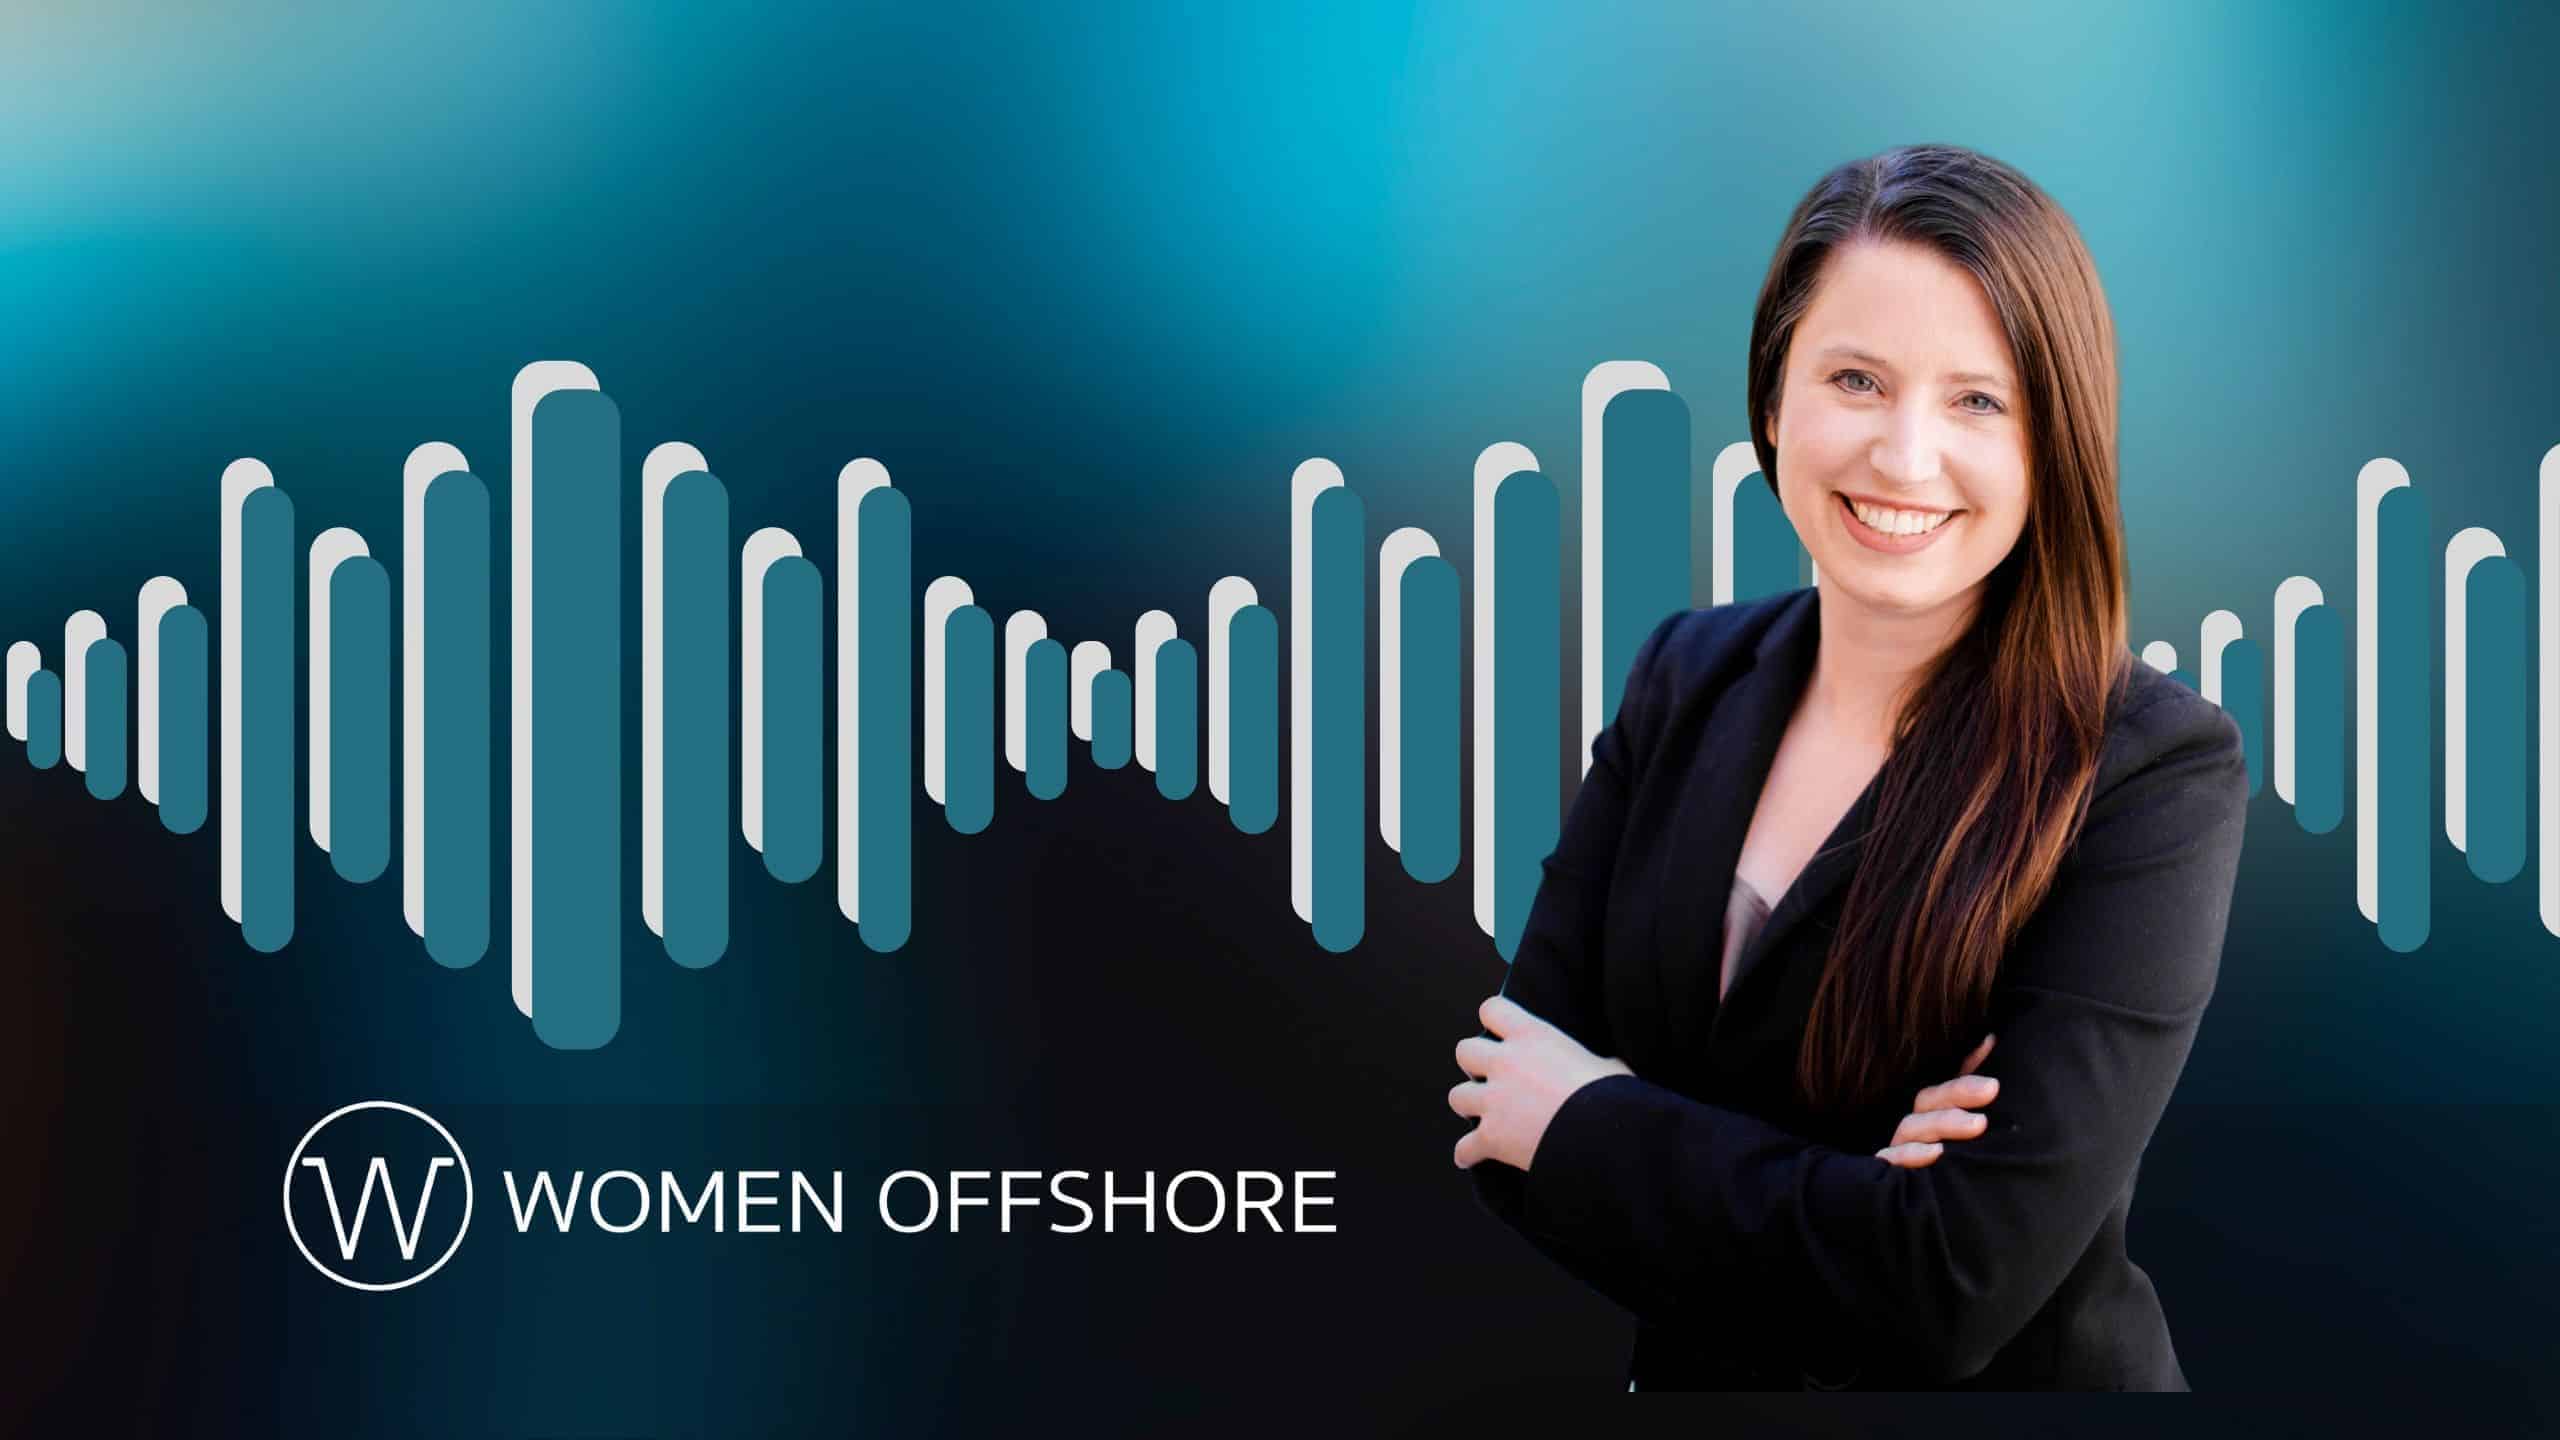 Listen to the Podcast - Women Offshore